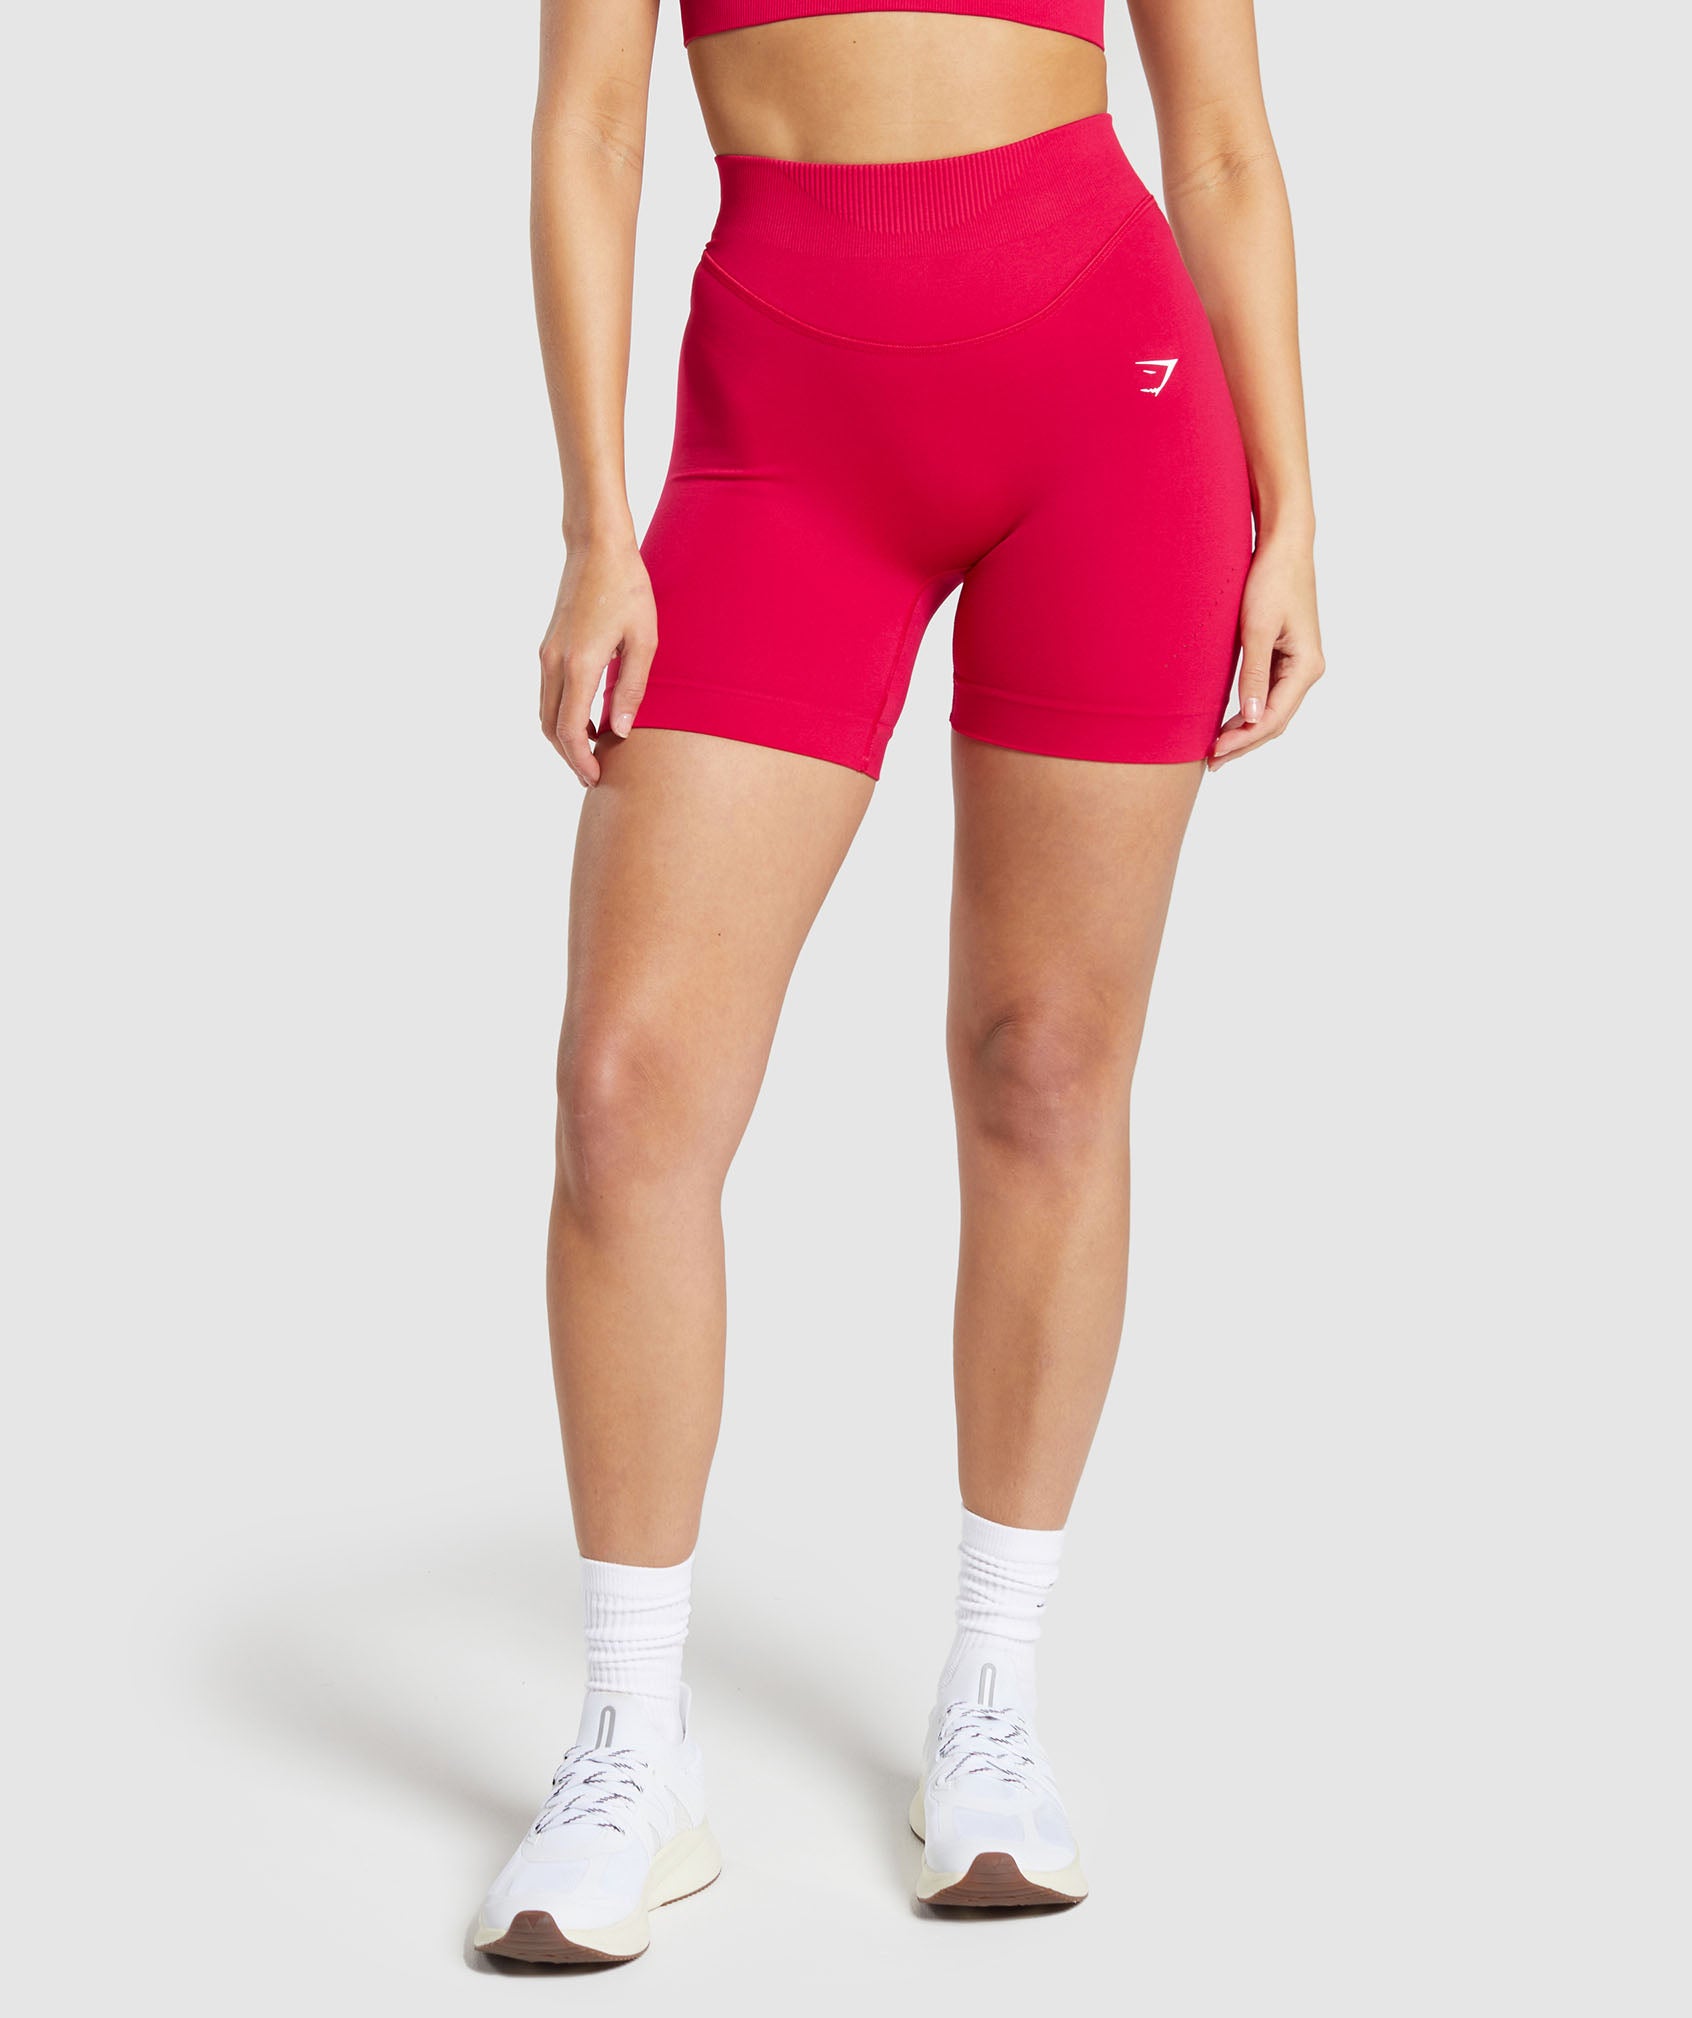 Gymshark Adapt Seamless Shorts Ombre Pink Blue Medium High Rise *See  Measurements* Multiple - $40 (41% Off Retail) - From Royal